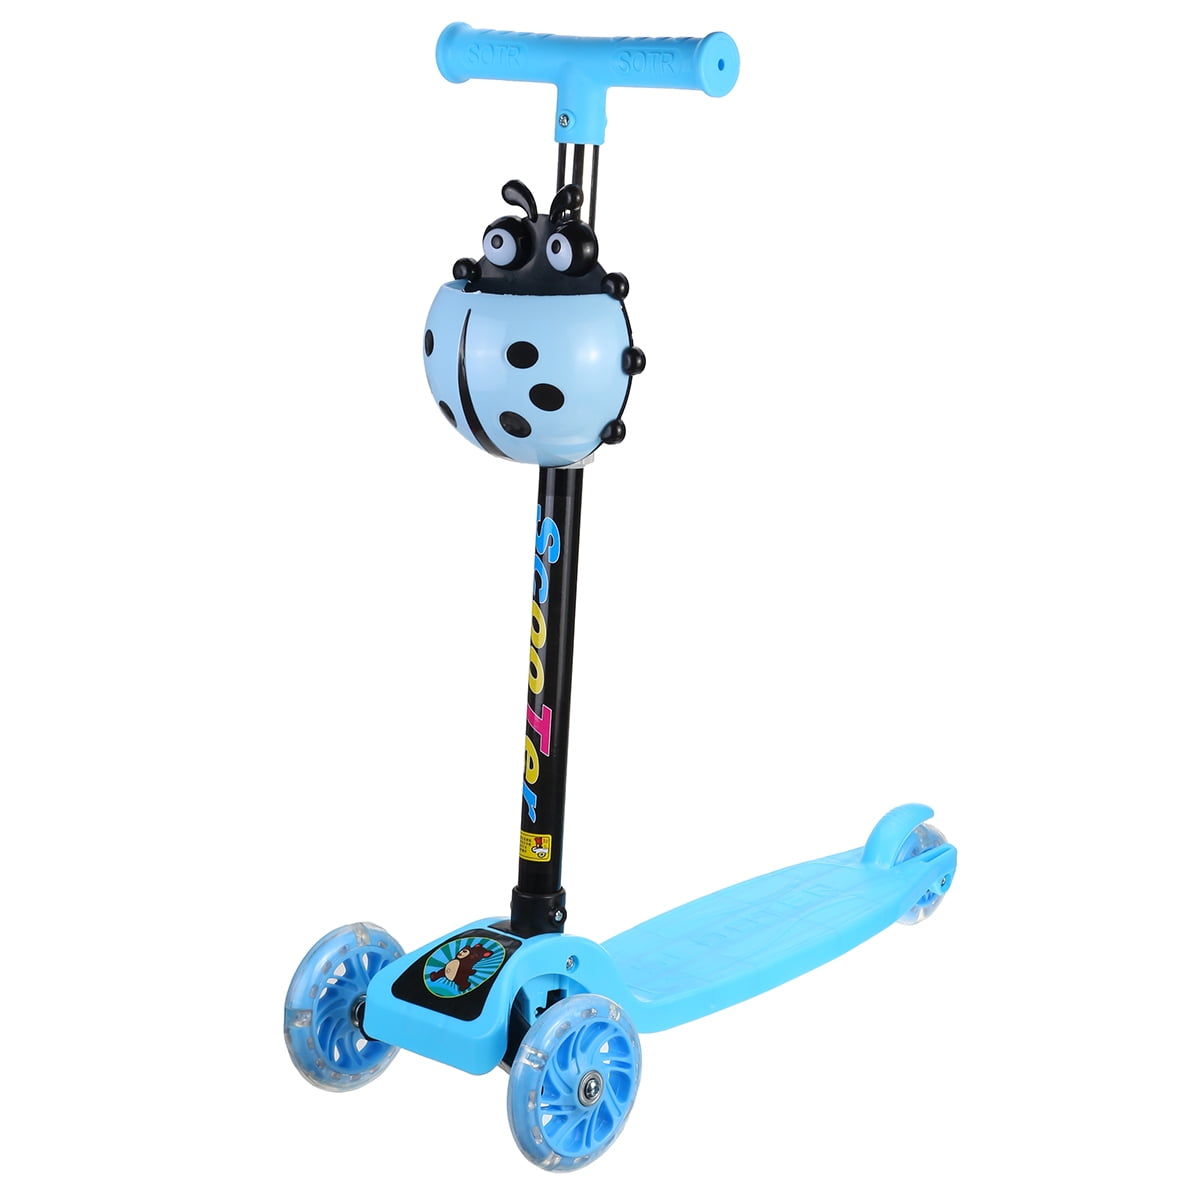 Veekuer Foldable Kick Scooter with Adjustable Heights,Three PU LED Flashing Light Wheels,Removable Seat for Girls and Boys